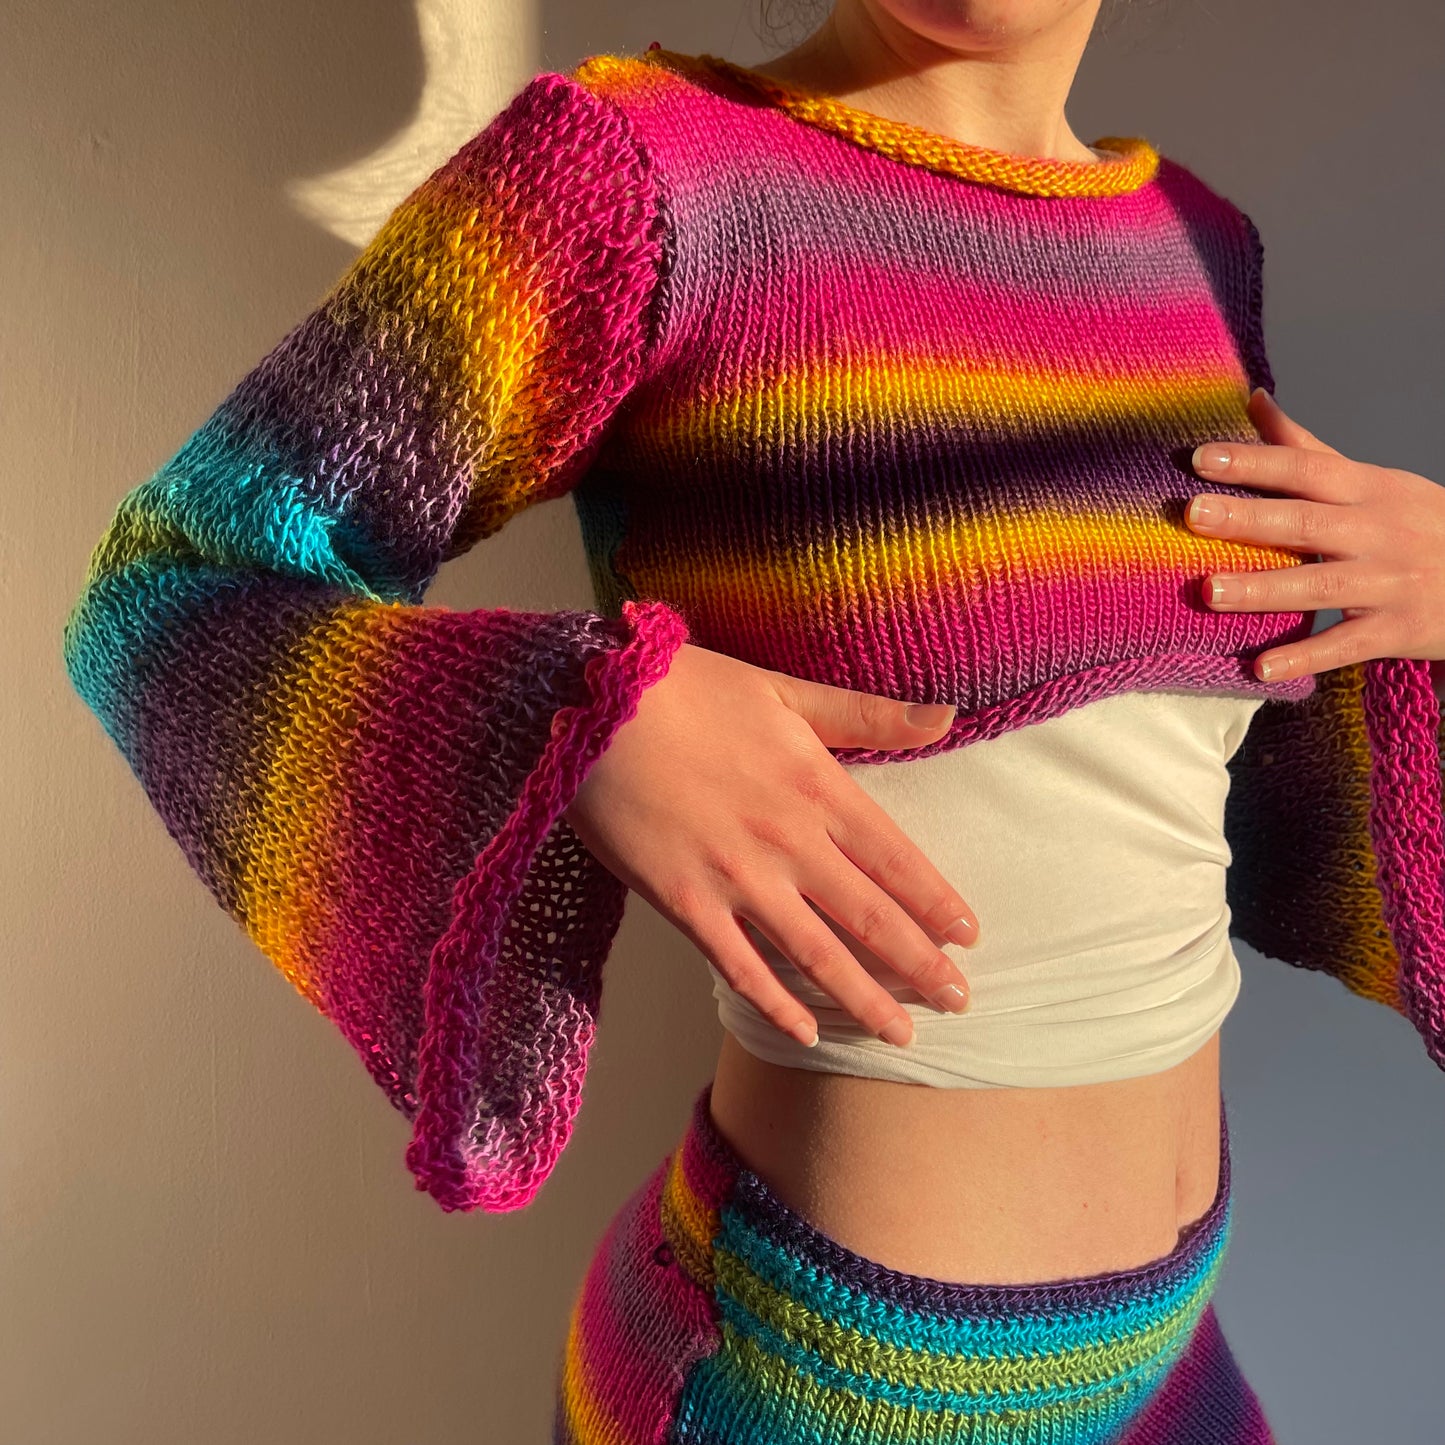 Handmade knitted ombré cropped jumper - Sunshine colourway